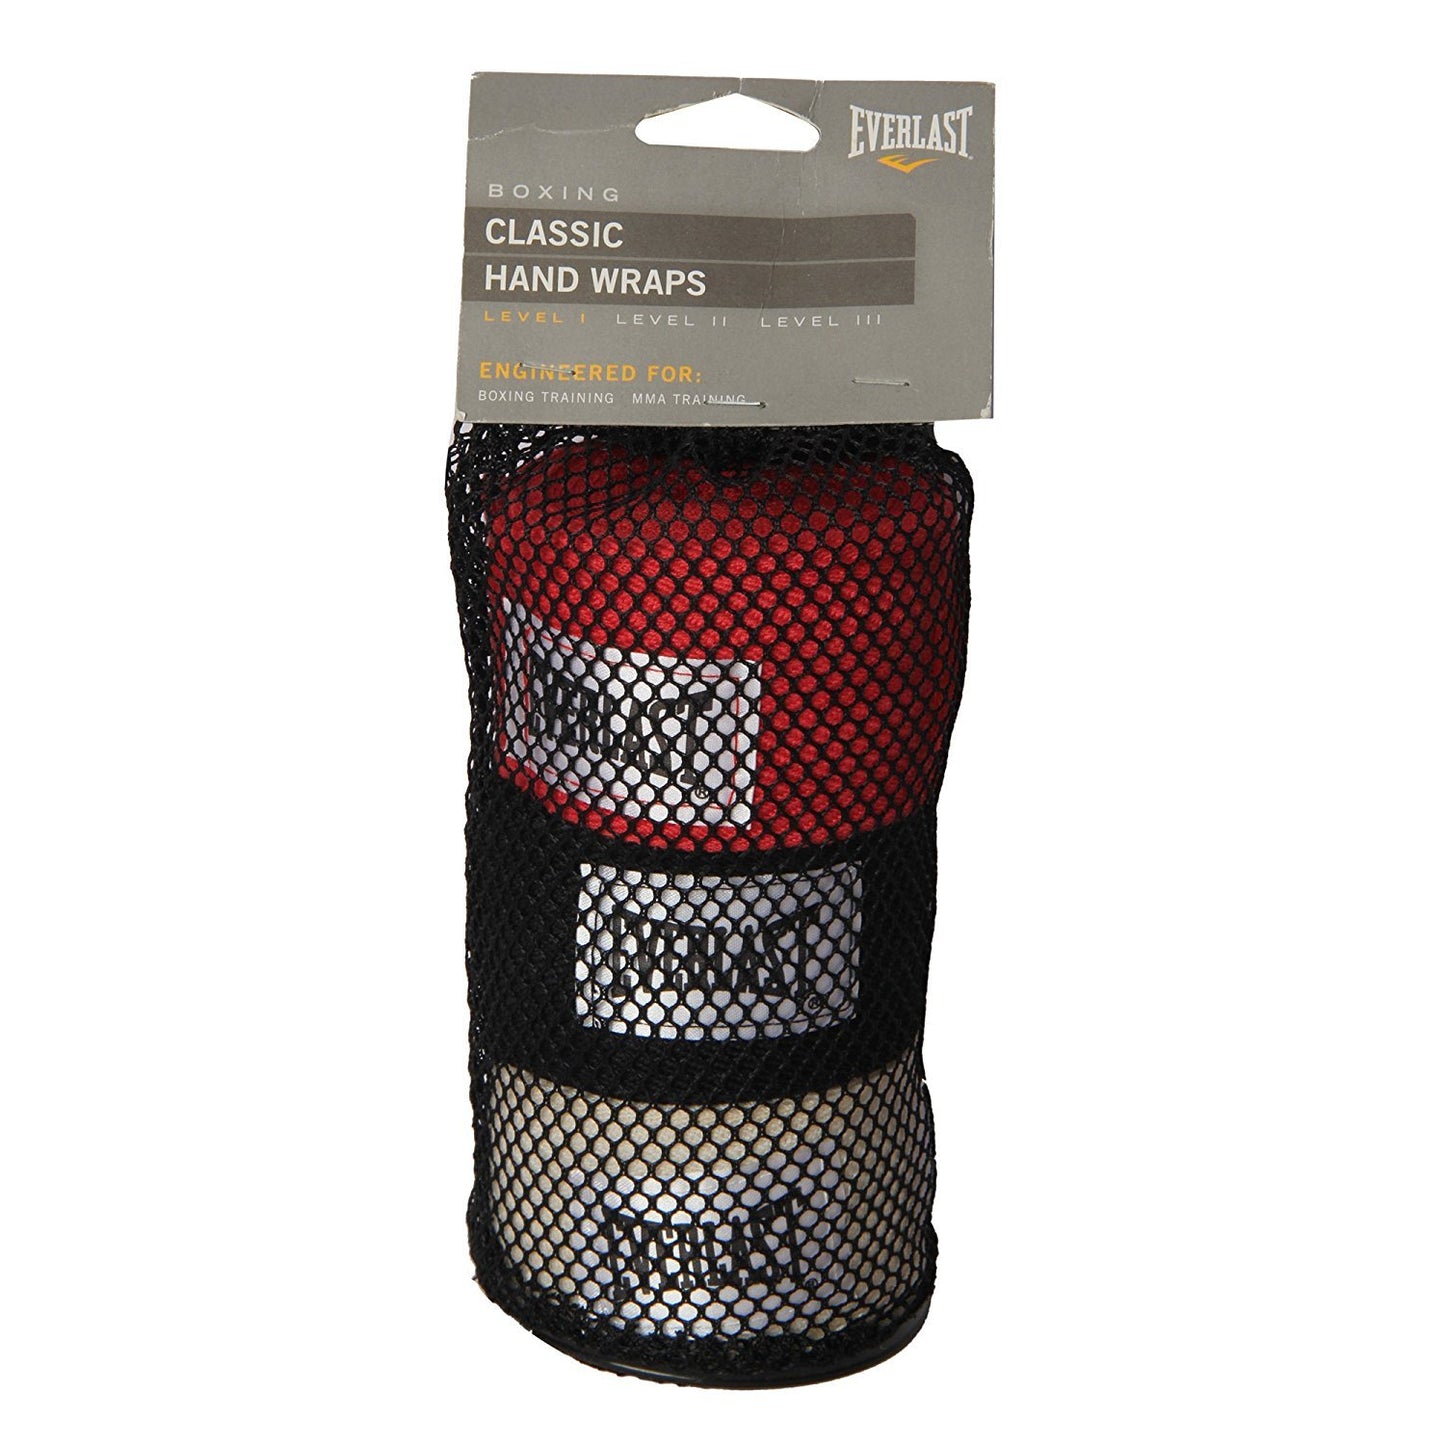 Everlast Classic Hand Wraps - 120 inches, Pack of 3 - Best Price online Prokicksports.com